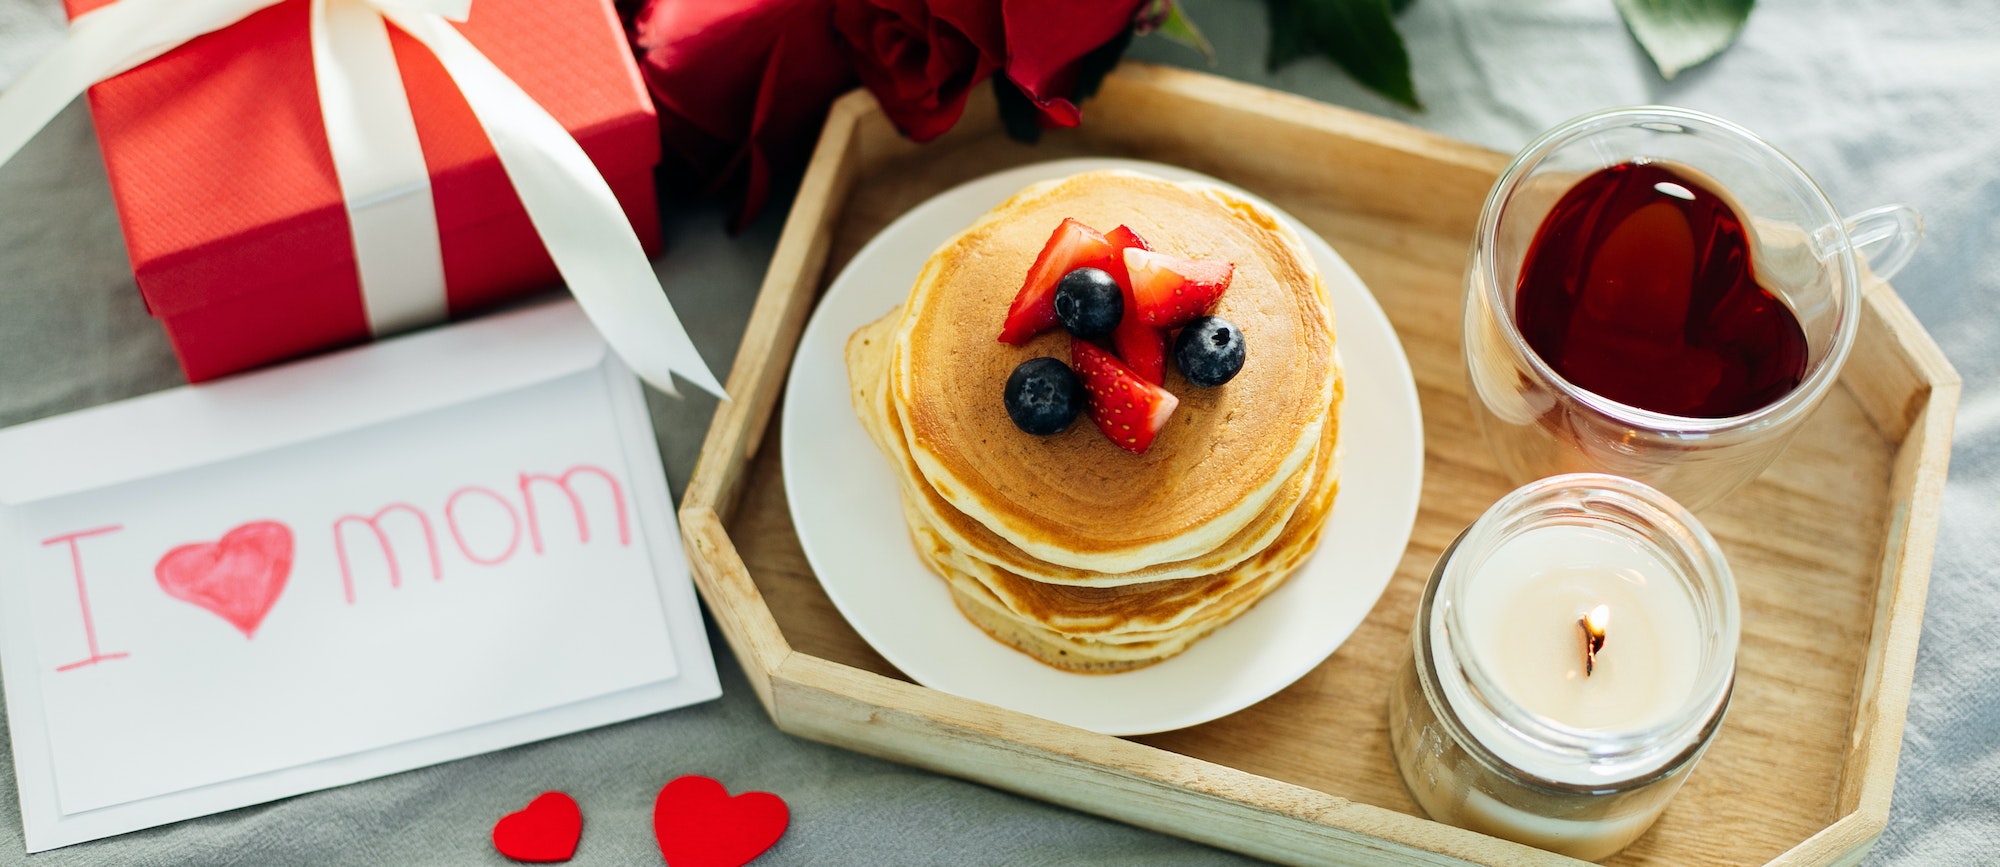 Banner image for desing web page. Mother's Day concept. Pancakes with berry, tea cup, burning candle